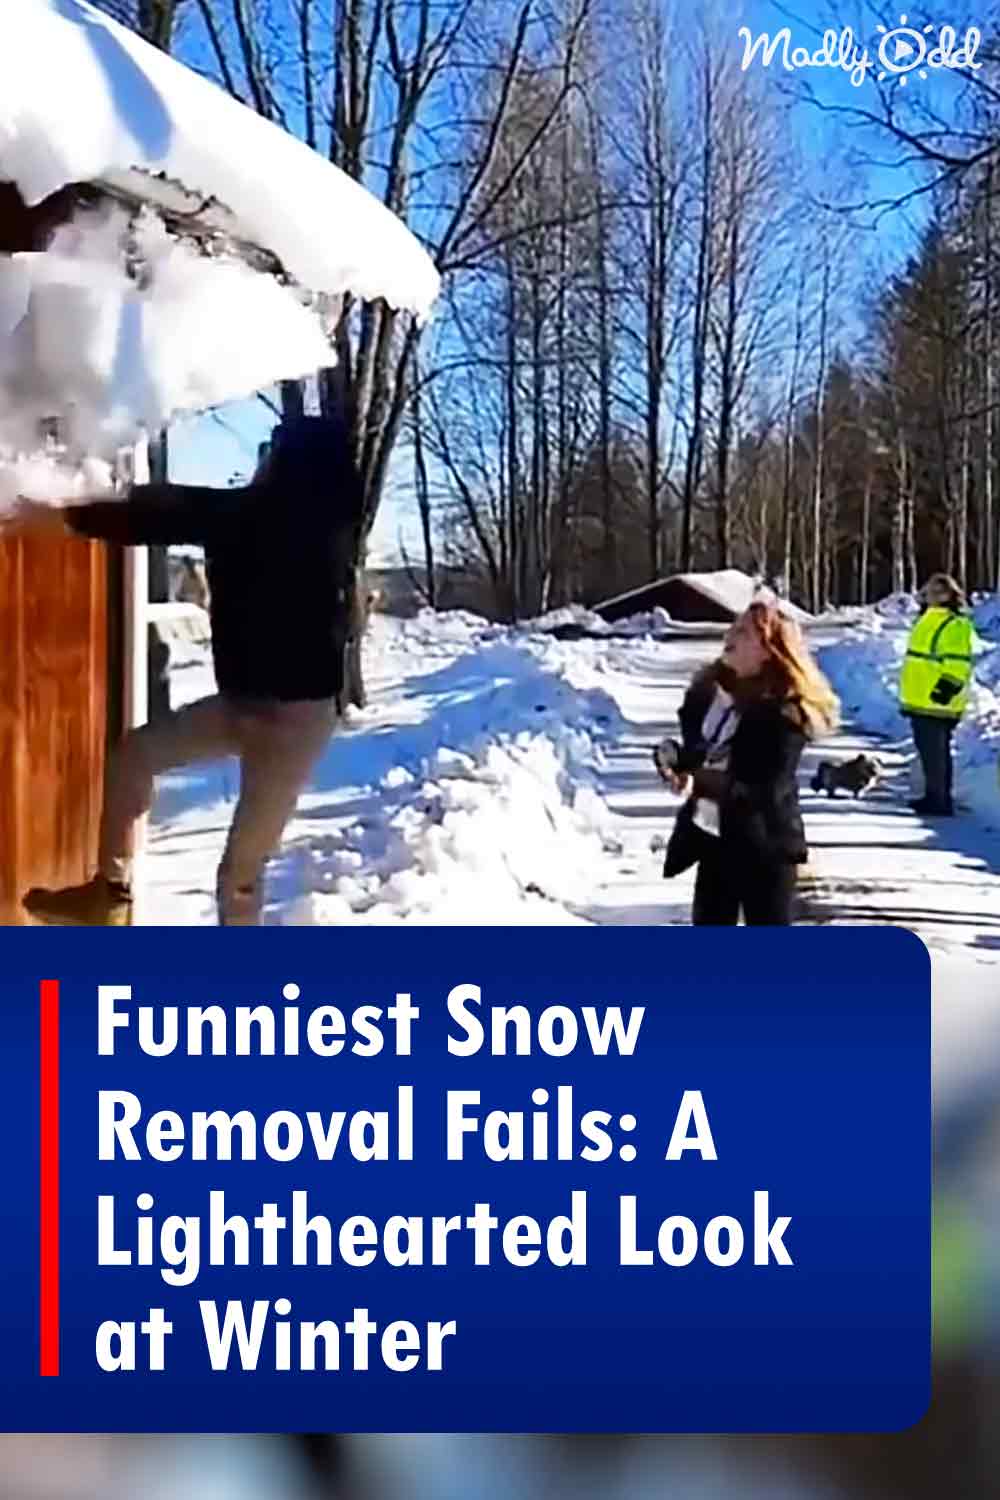 Funniest Snow Removal Fails: A Lighthearted Look at Winter